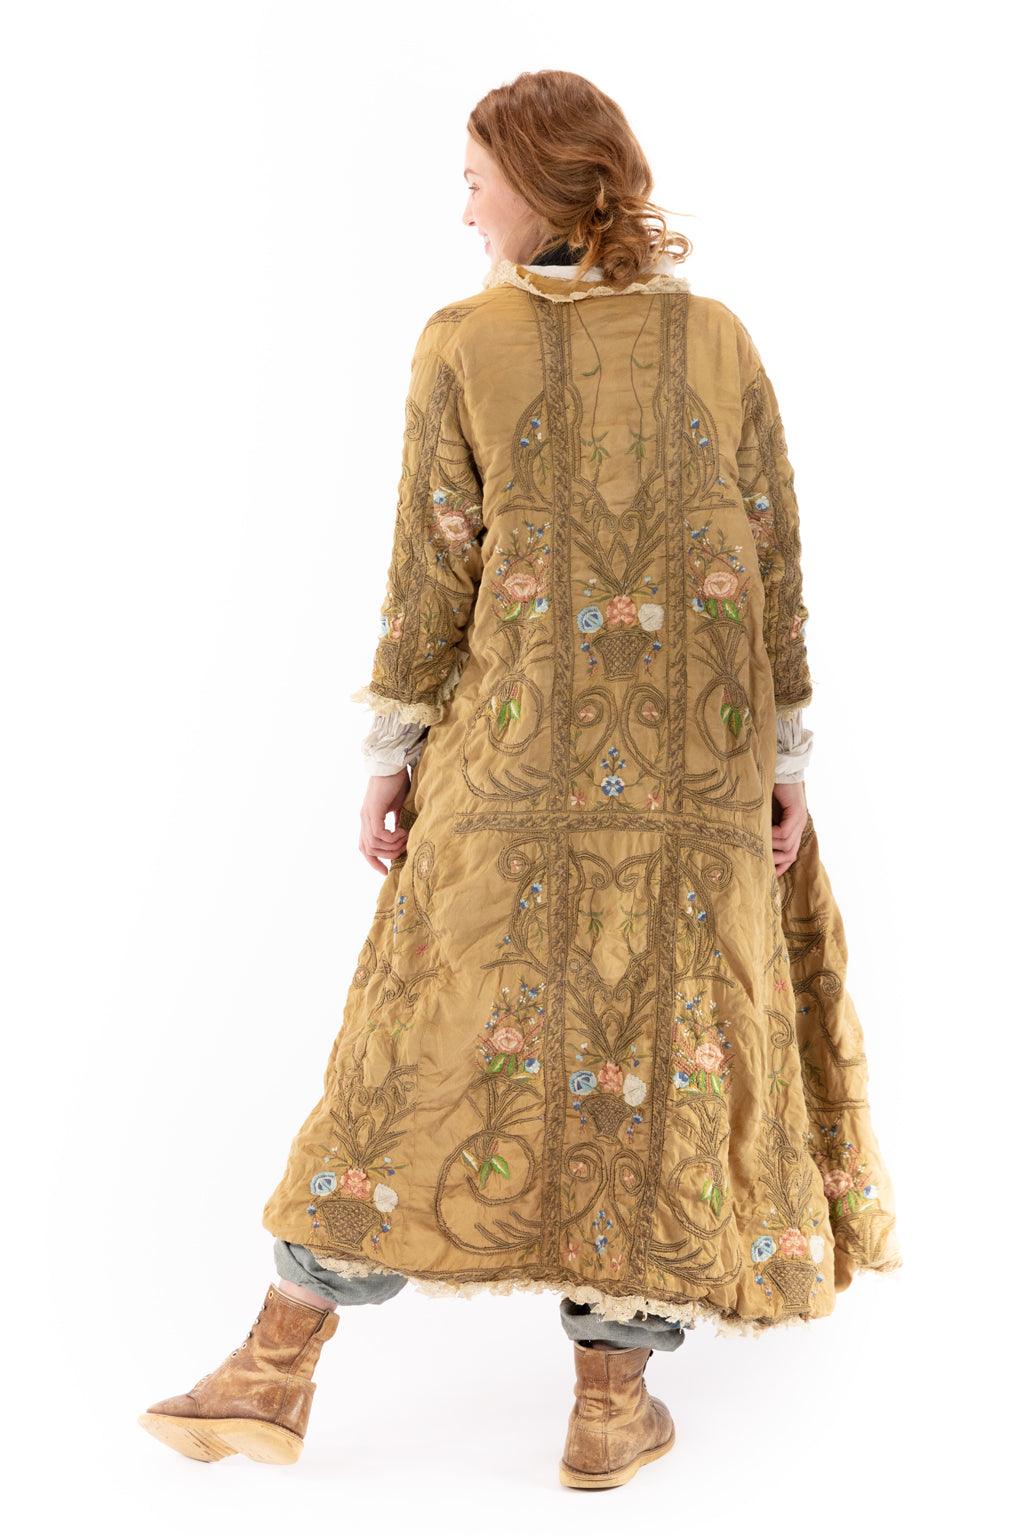 Embroidered OLeary Coat - Magnolia Pearl Clothing